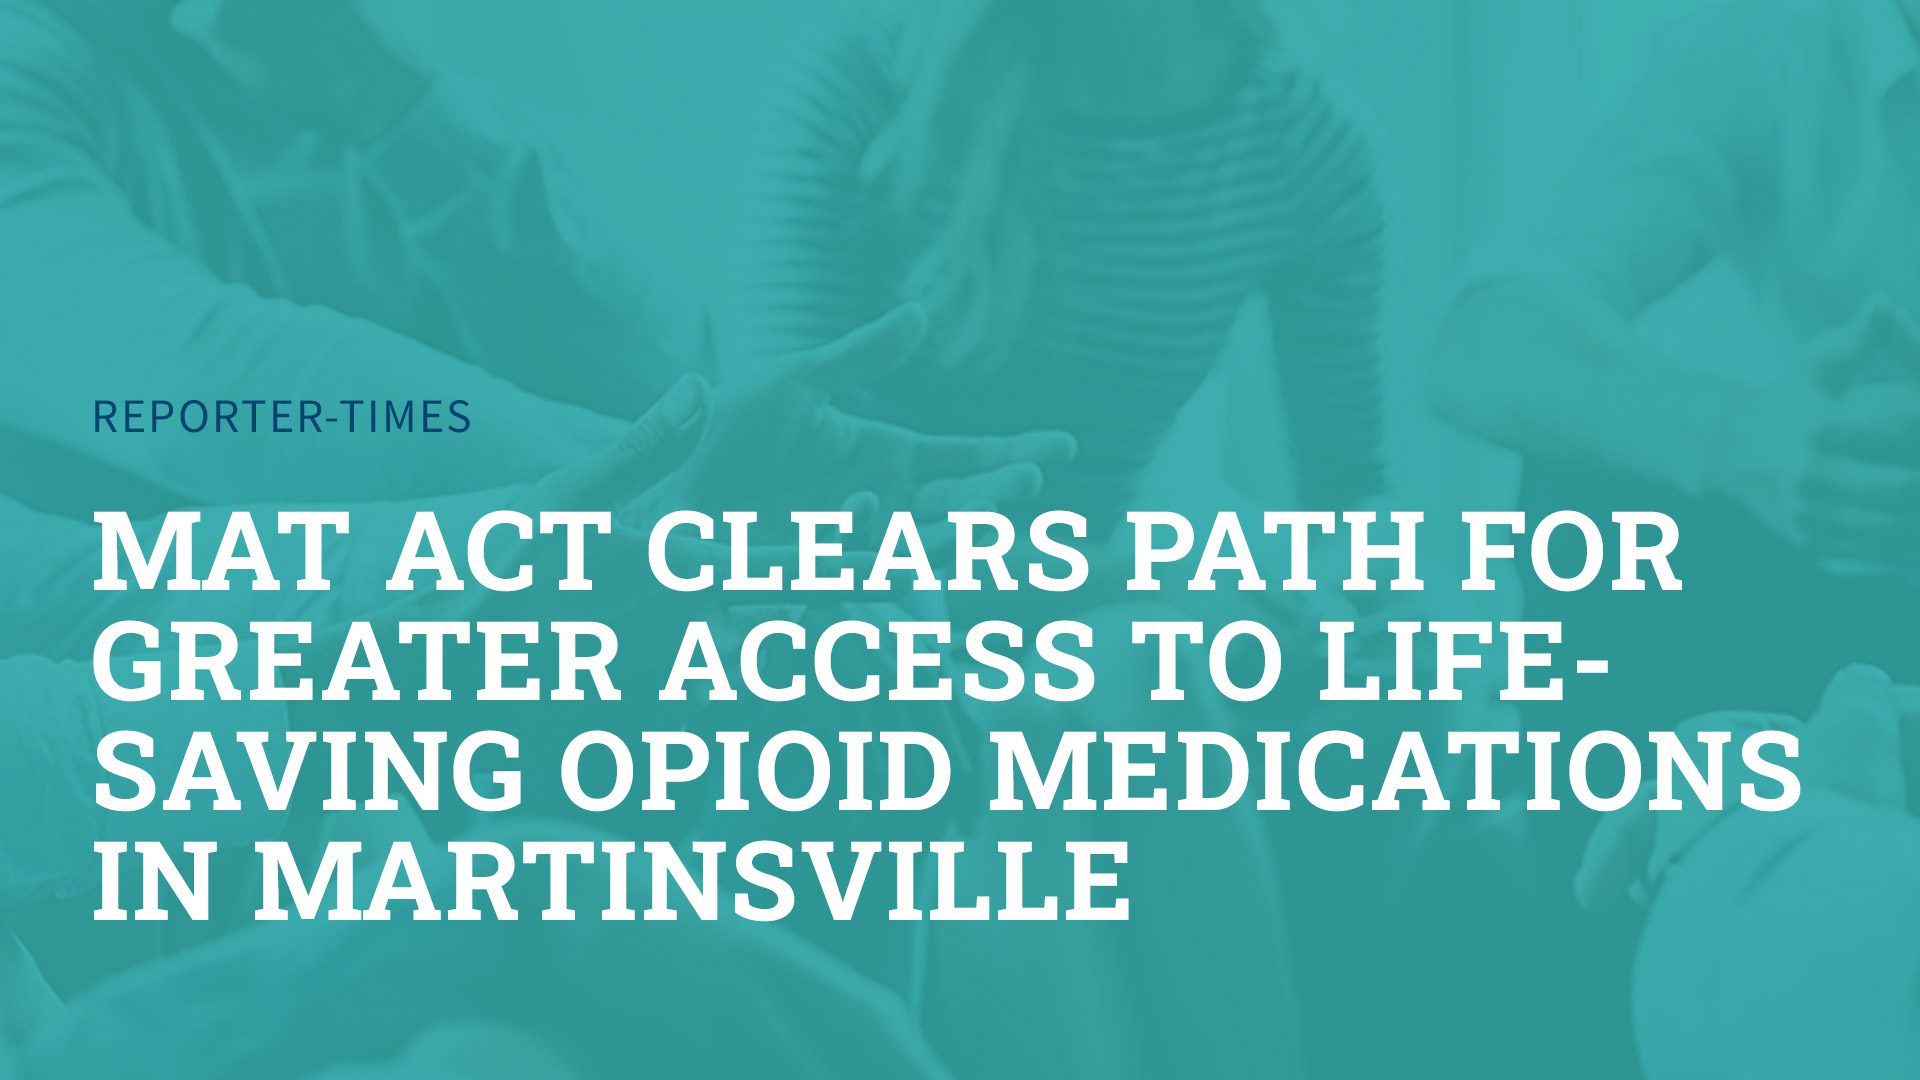 MAT Act Clears Path for Greater Access to Life-Saving Opioid Medications in Martinsville